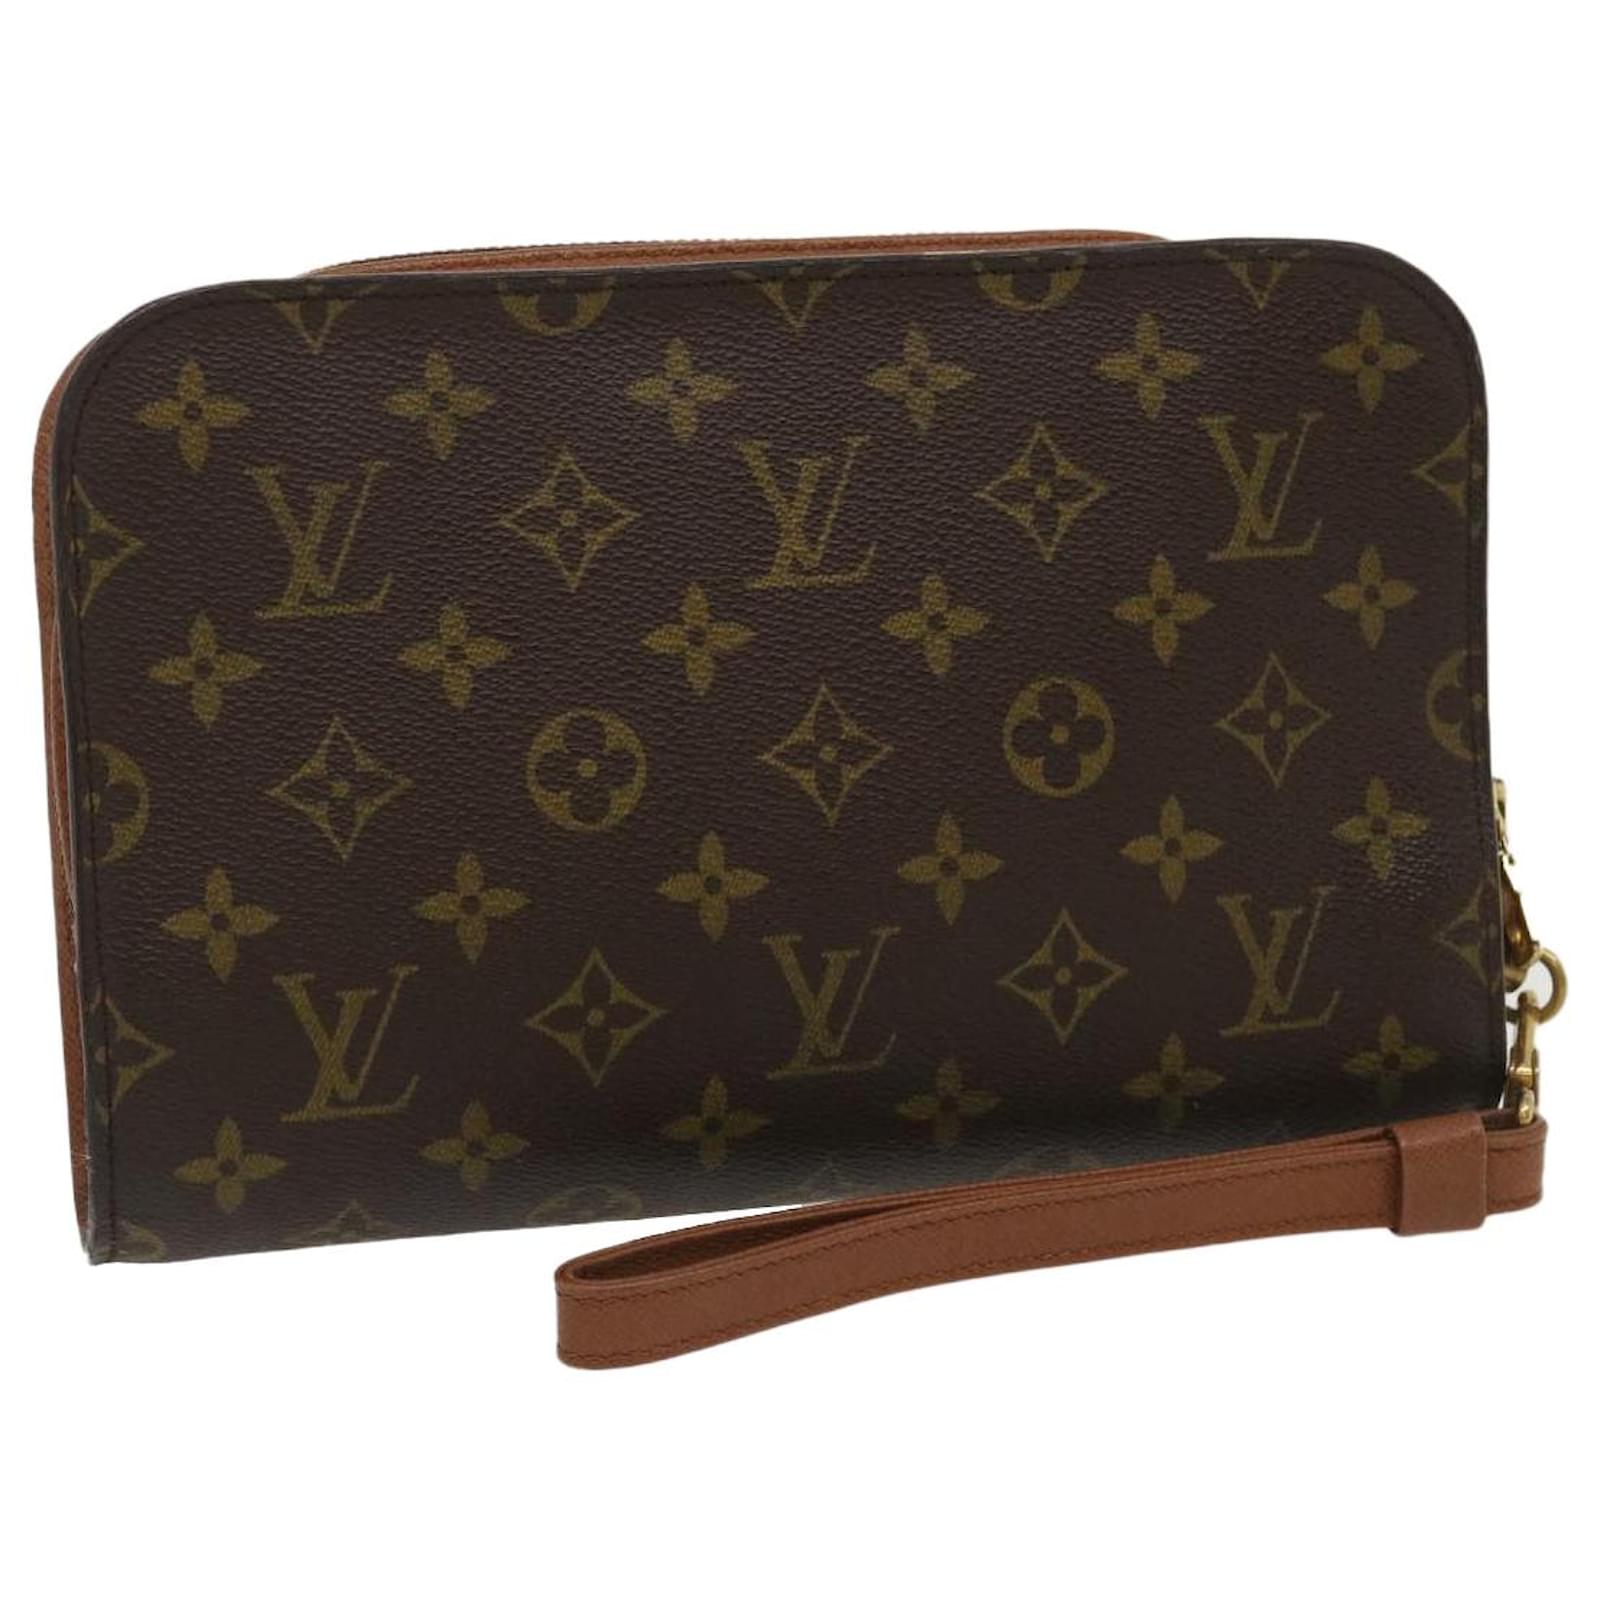 Louis Vuitton Monogram Canvas His Or Hers Orsay Clutch Bag With Leather  Wrist Strap sold at auction on 17th May